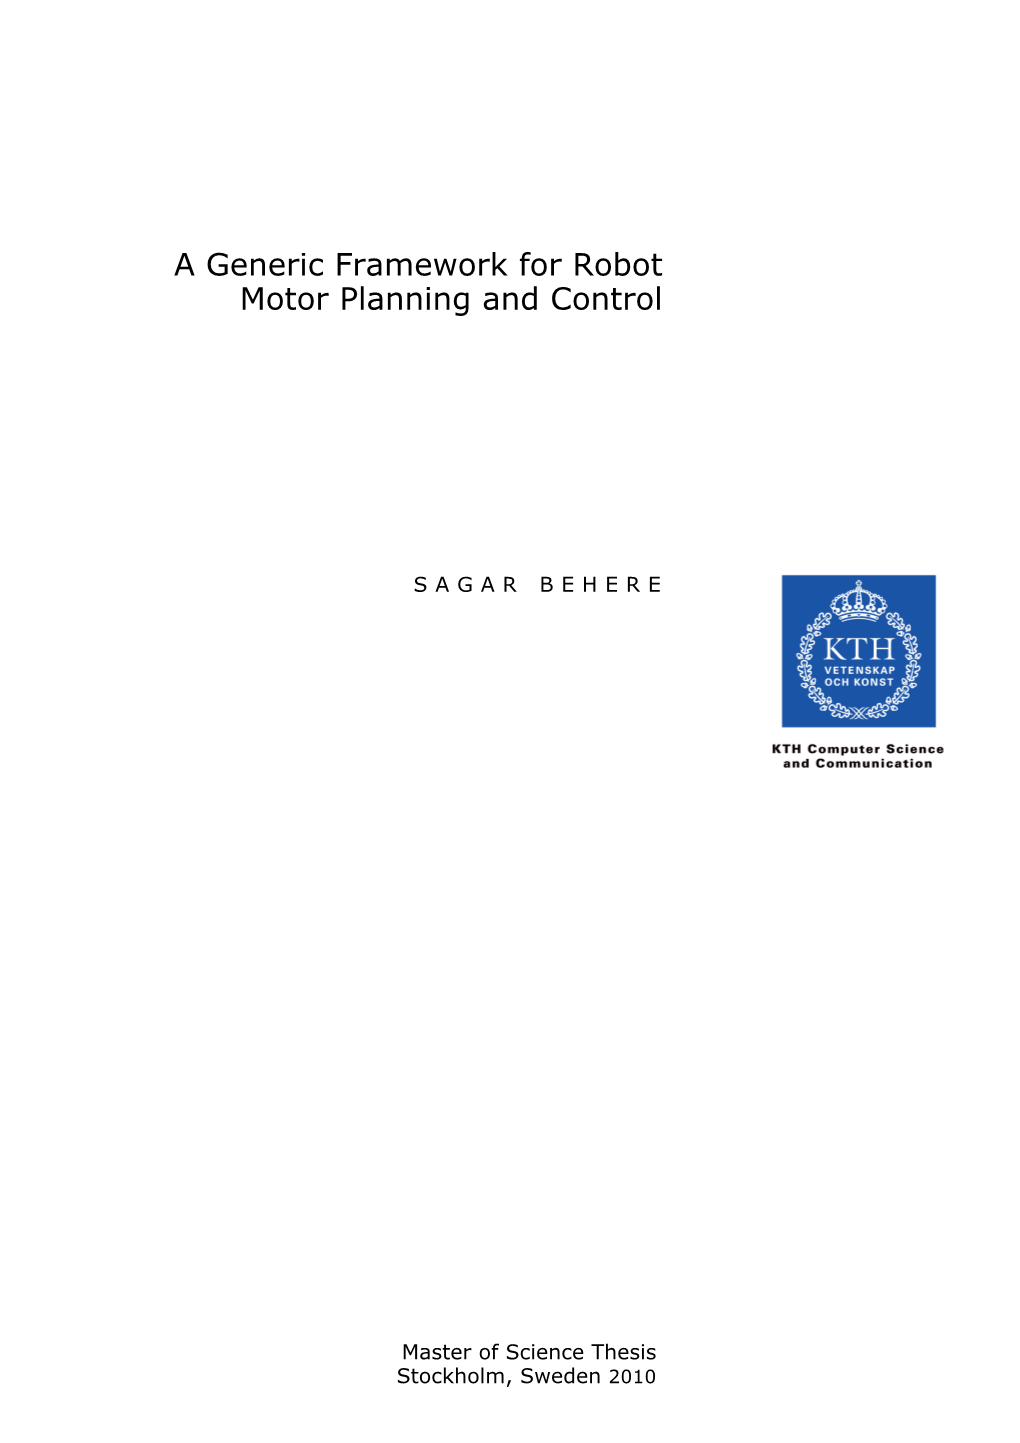 A Generic Framework for Robot Motion Planning and Control